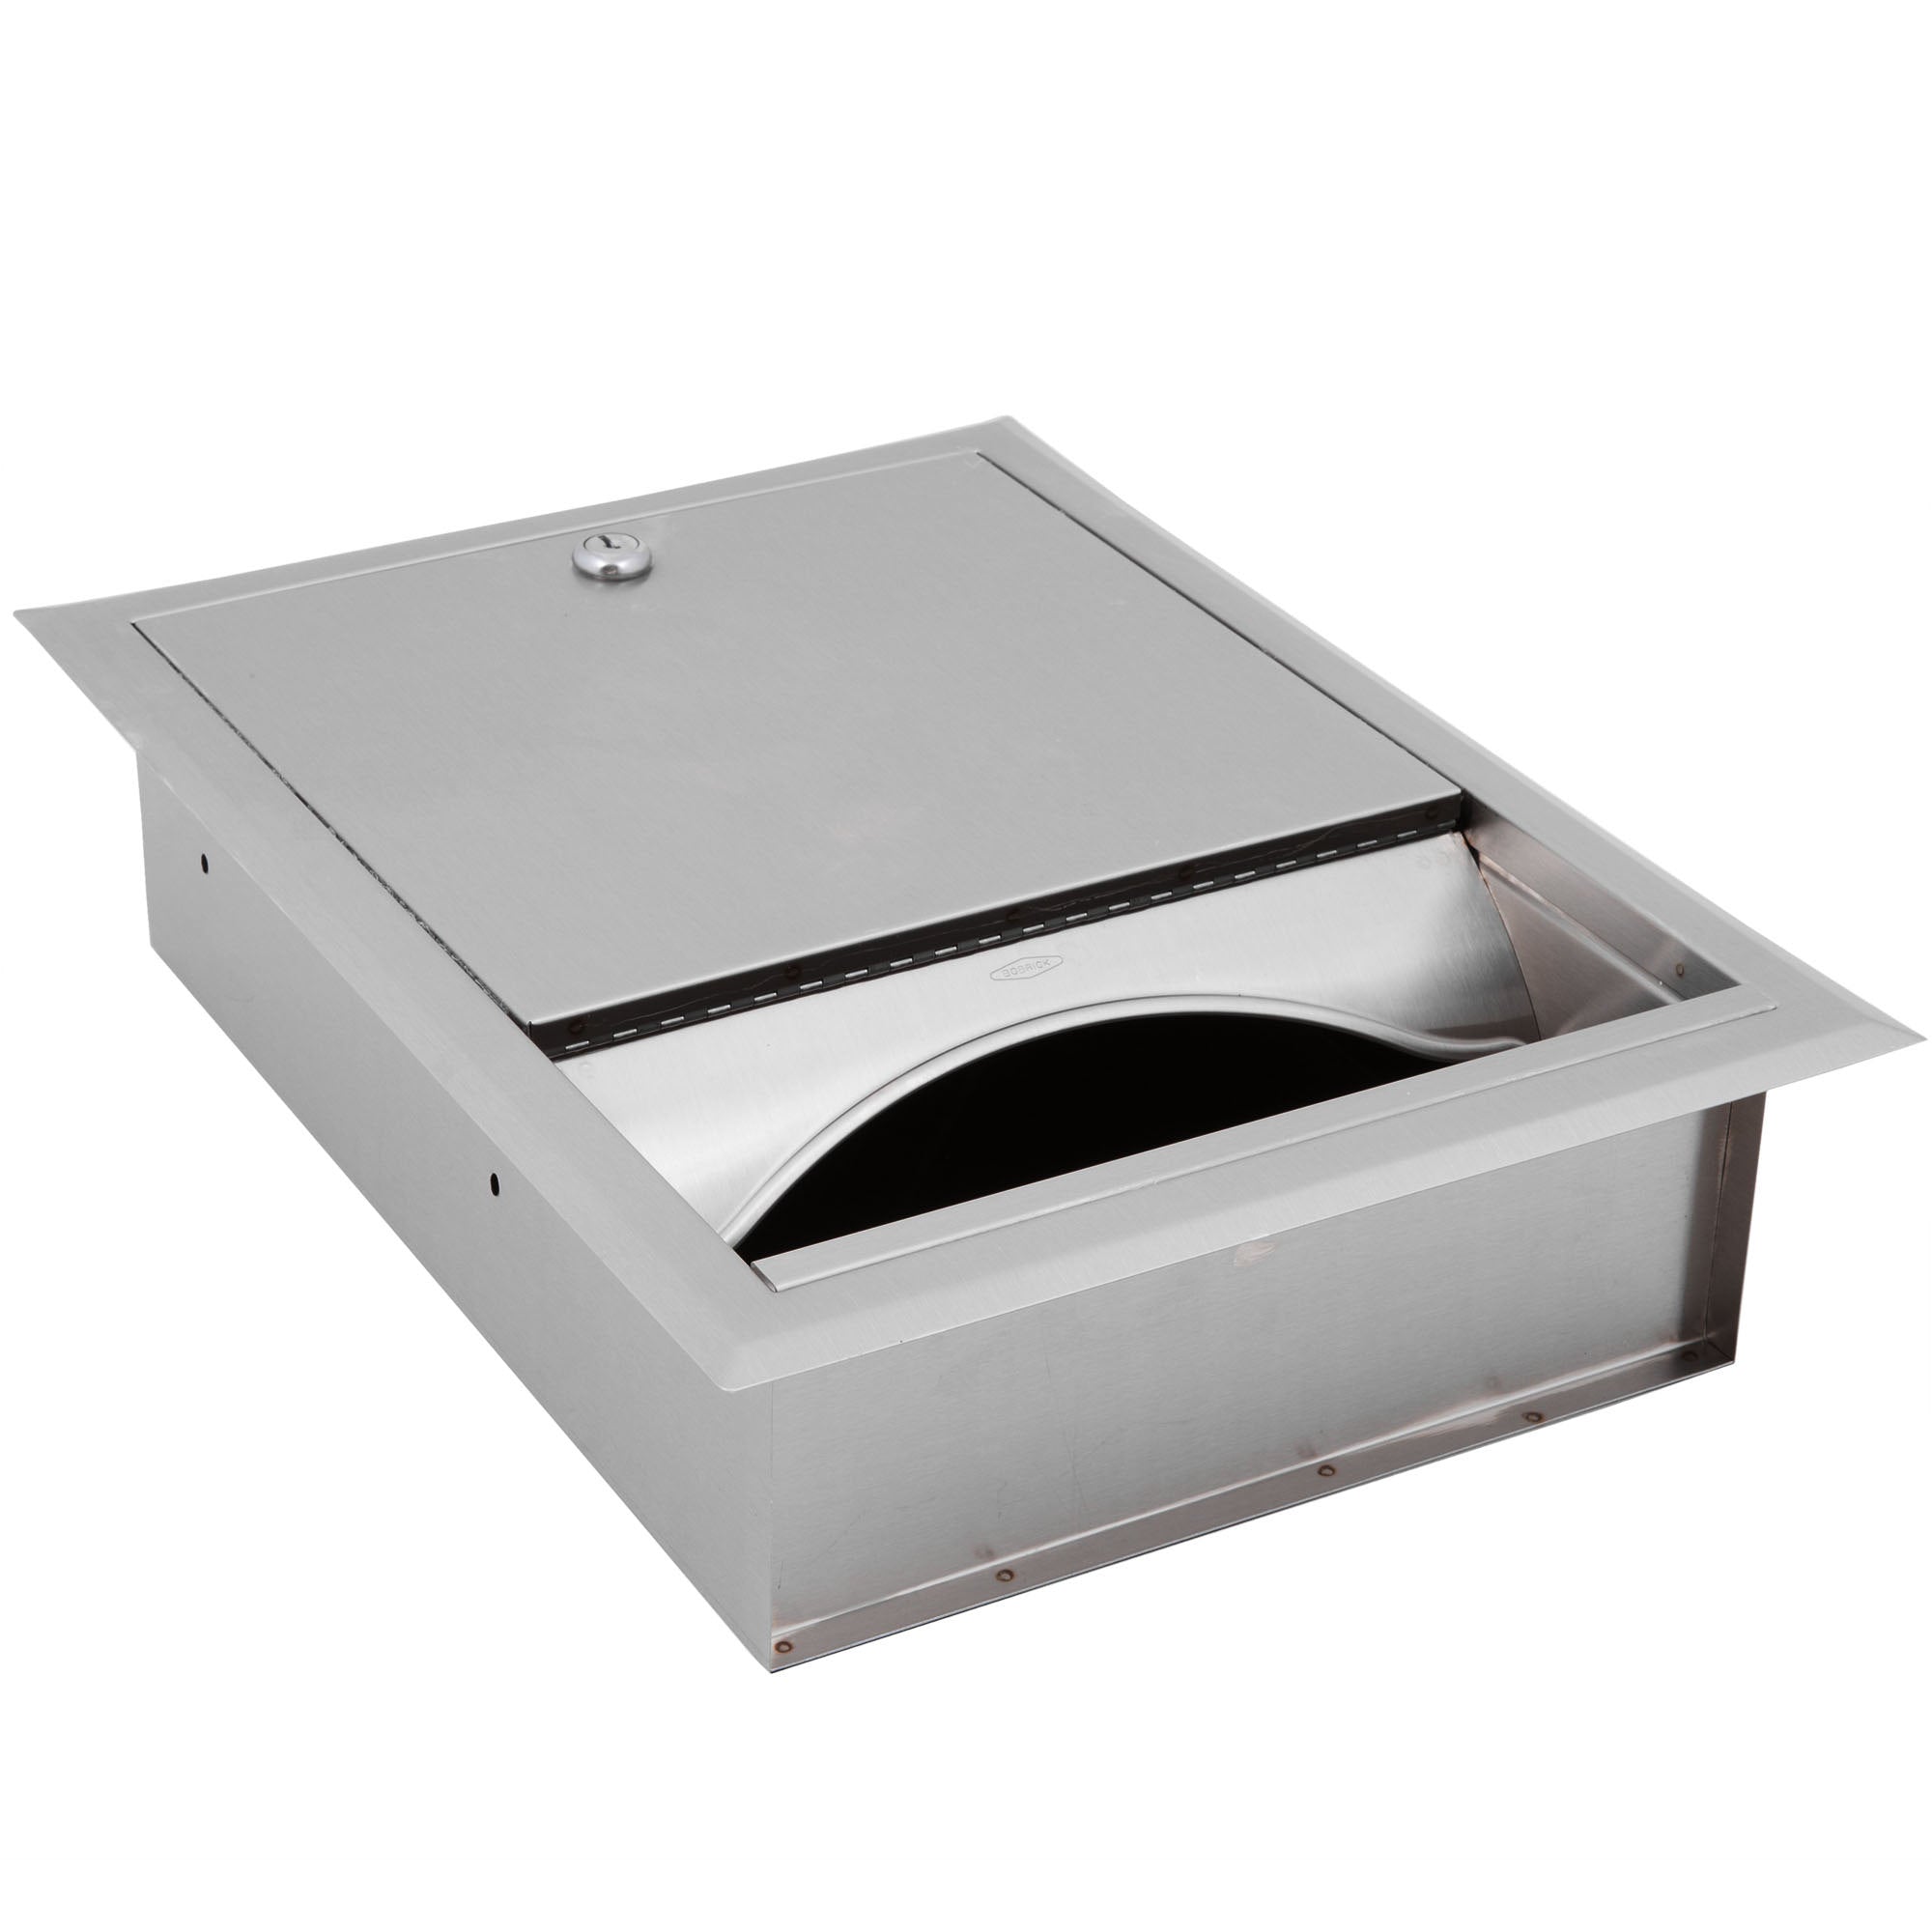 Bobrick B-359 Commercial Paper Towel Dispenser, Recessed, Stainless Steel